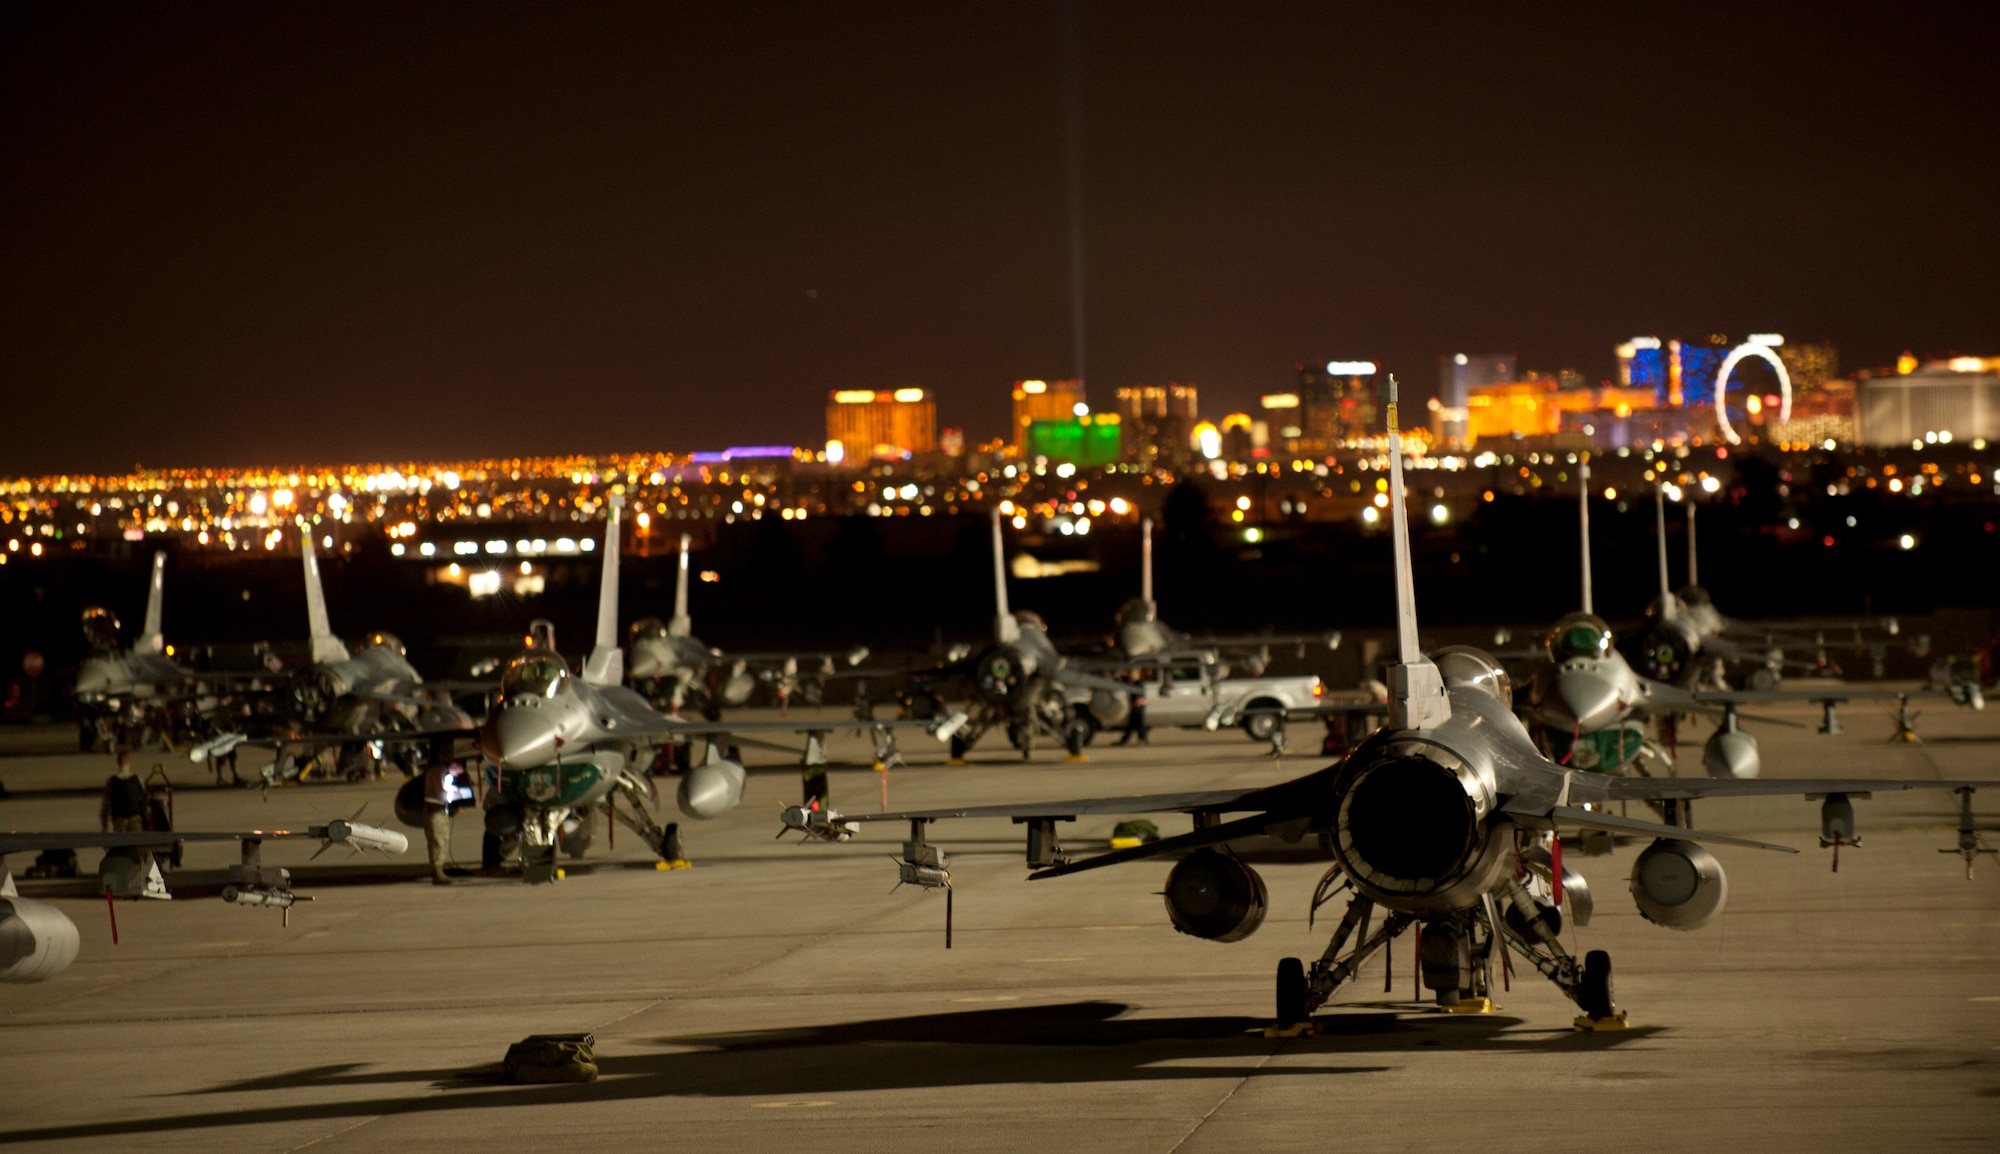 F-16 Fighting Flacons assigned to the 134th Fighter Squadron, Burlington Air National Guard Base, Vt., stand ready on the flightline overlooking the Las Vegas strip prior to playing part in a Red Flag 15-1 night training sortie at Nellis Air Force Base, Nev., Feb. 4, 2015. During Red Flag exercises, the Nellis flightline can be home to more than 150 U.S. Air Force, joint and coalition aircraft. (U.S. Air Force photo by Airman 1st Class Joshua Kleinholz)